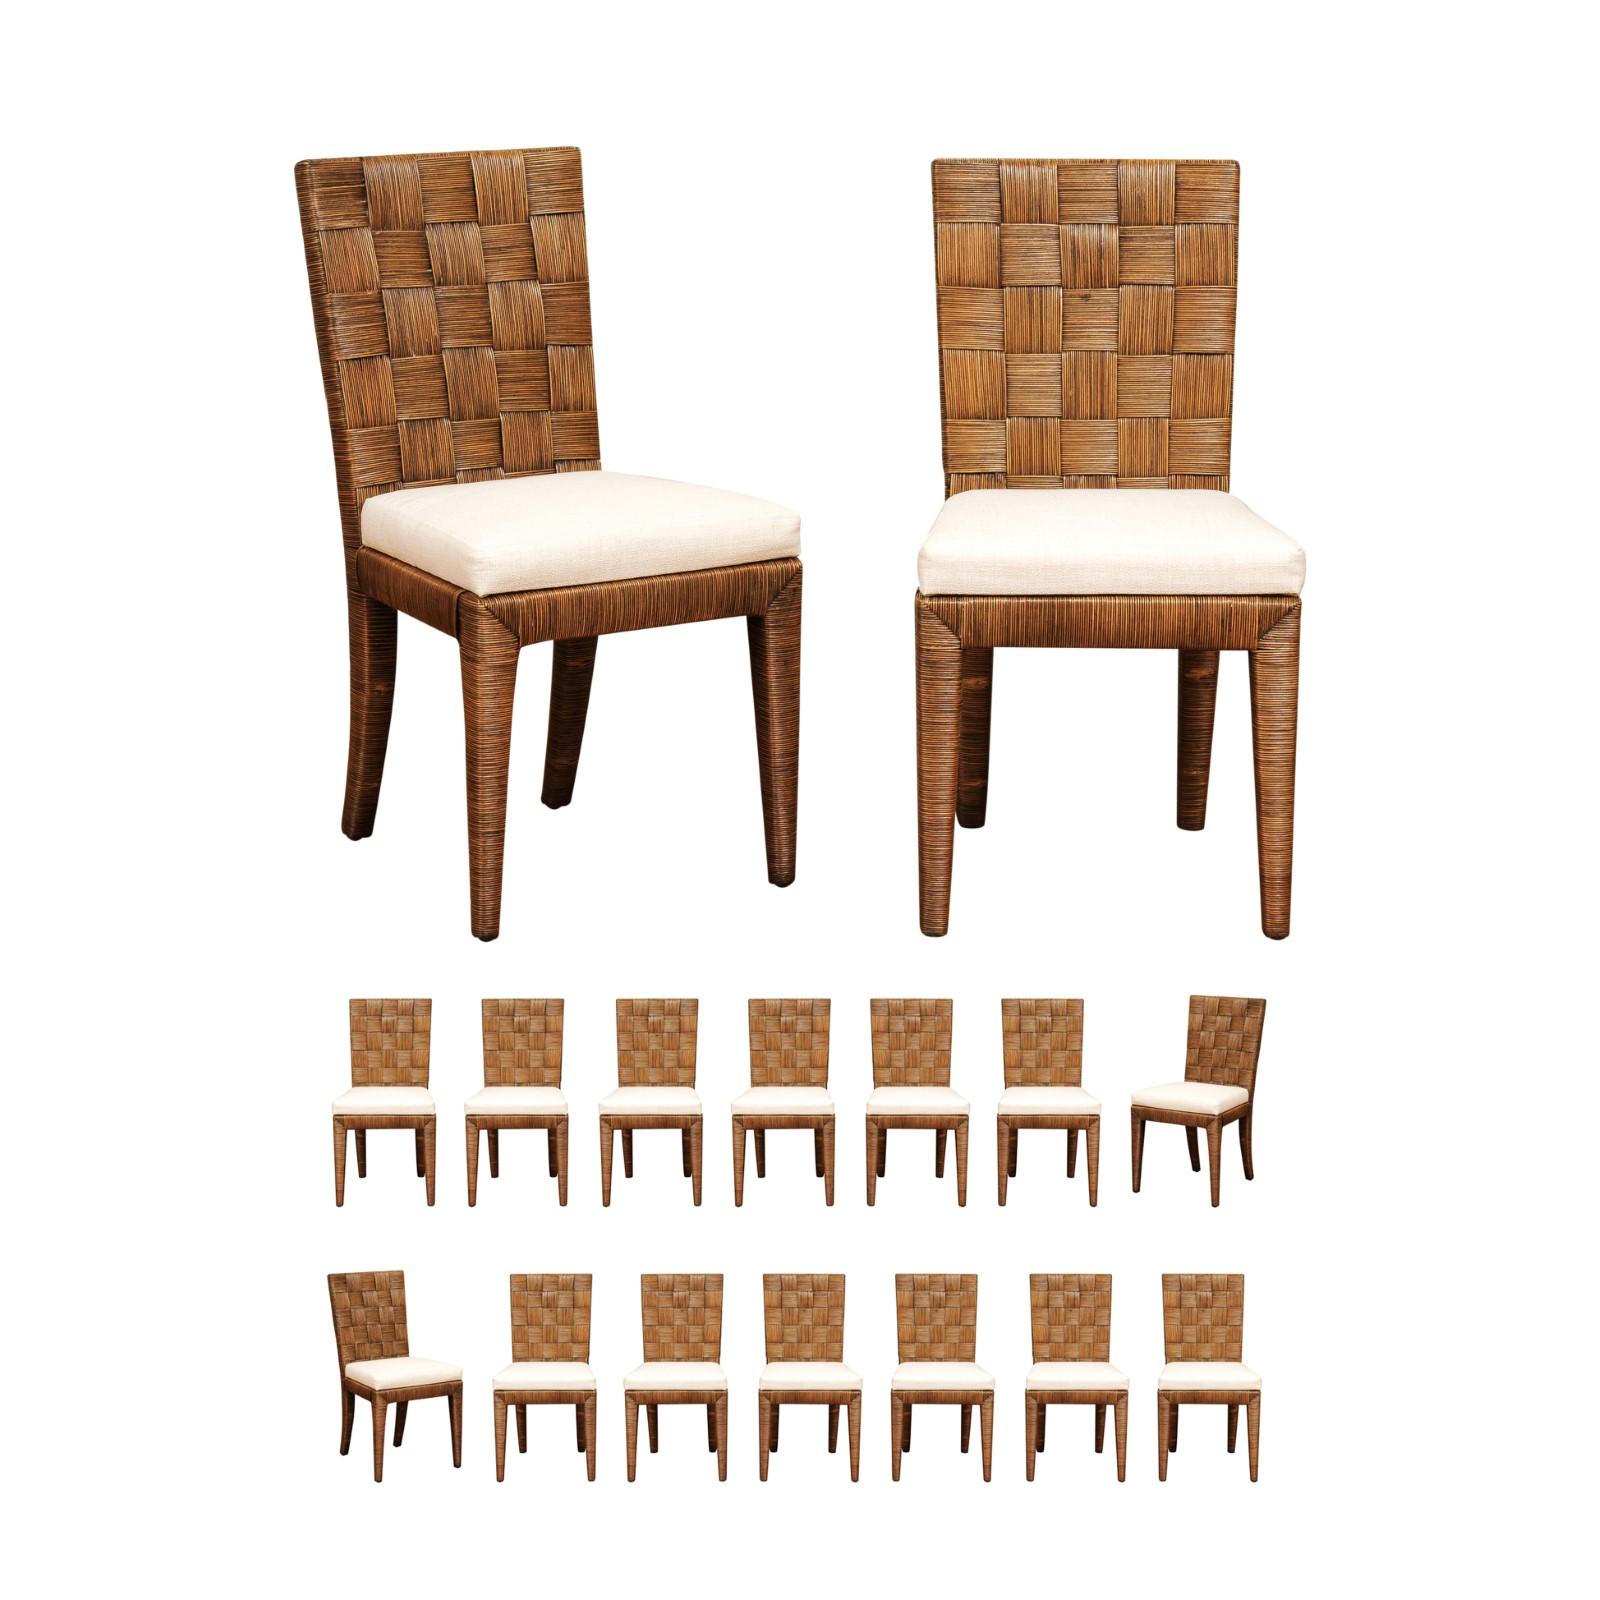 This magnificent large set of organic dining chairs is shipped as professionally photographed and described in the listing narrative: Meticulously professionally restored, newly custom upholstered and completely installation ready. Expert custom